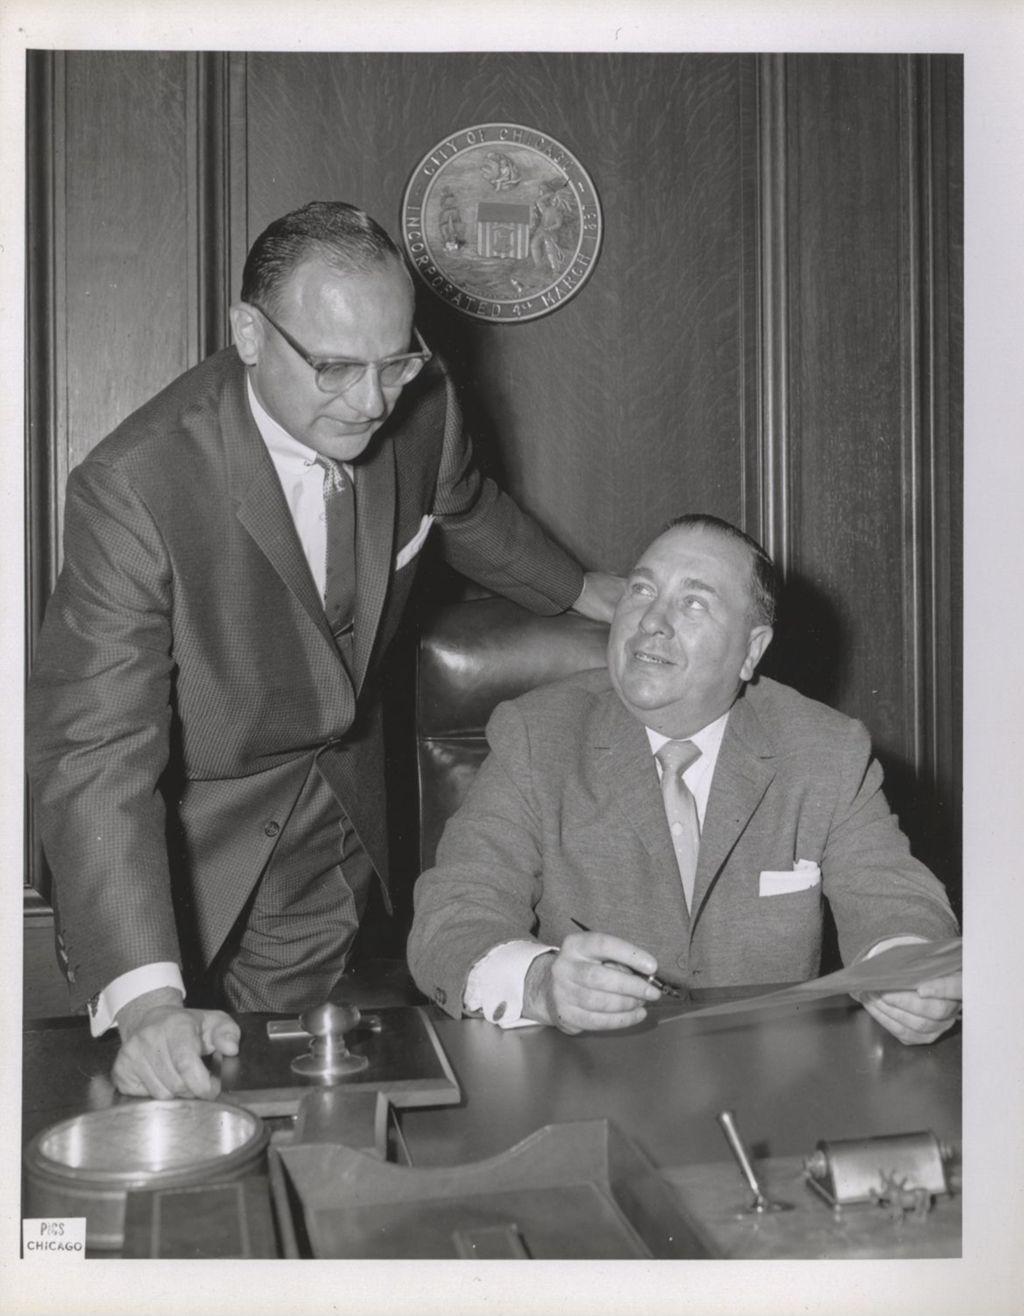 Richard J. Daley at his desk with a man next to him